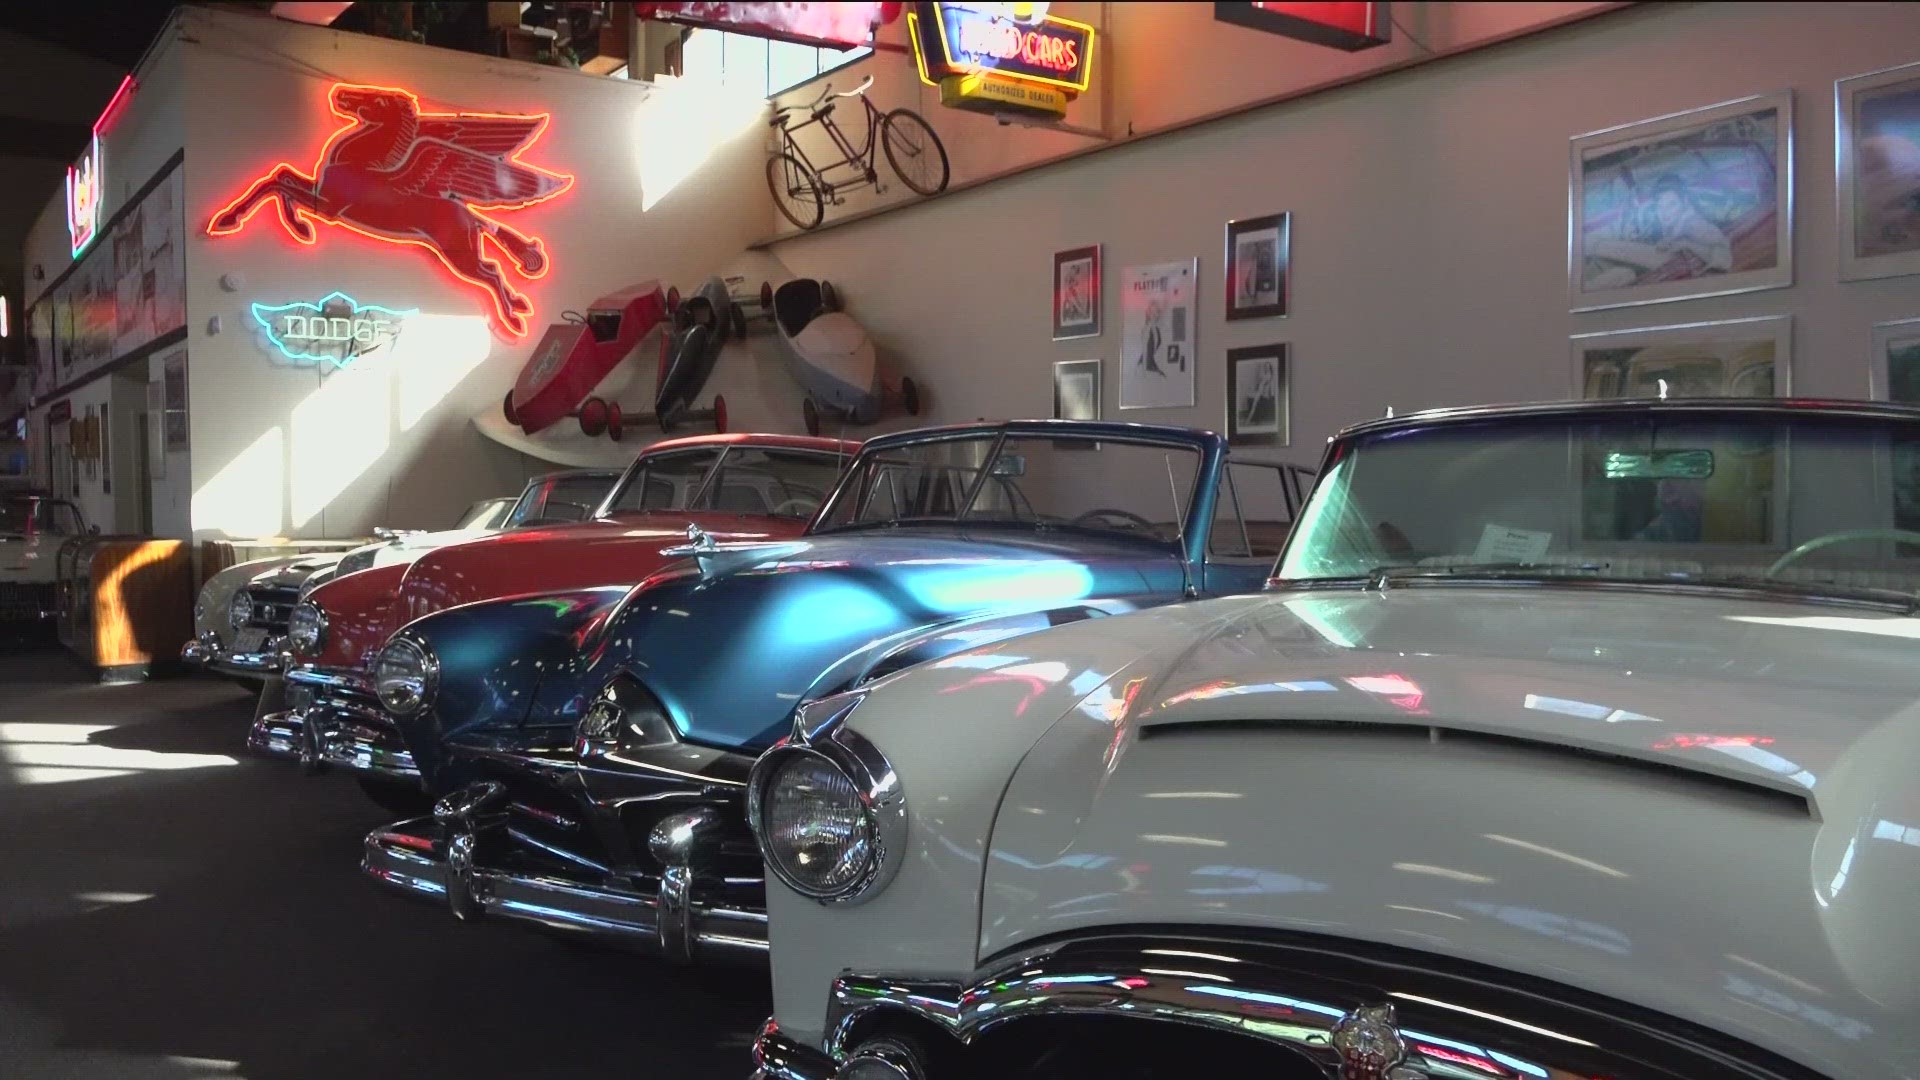 It's a place where vintage vehicles and wine meet with over 100 cars and memorabilia.